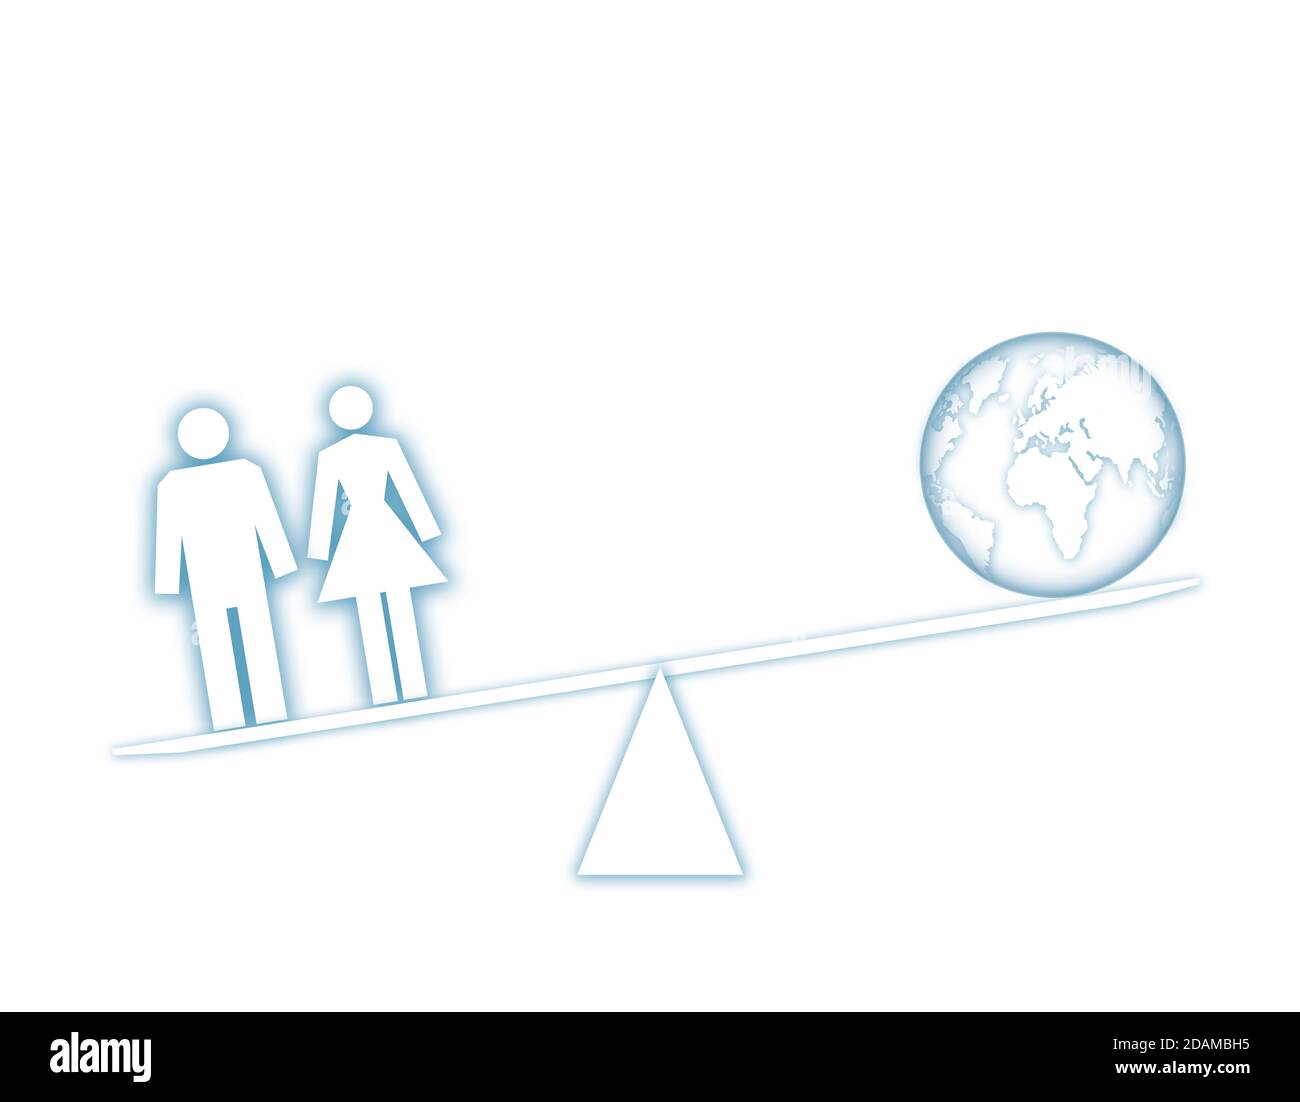 Seesaw scales with people and globe, illustration. Stock Photo